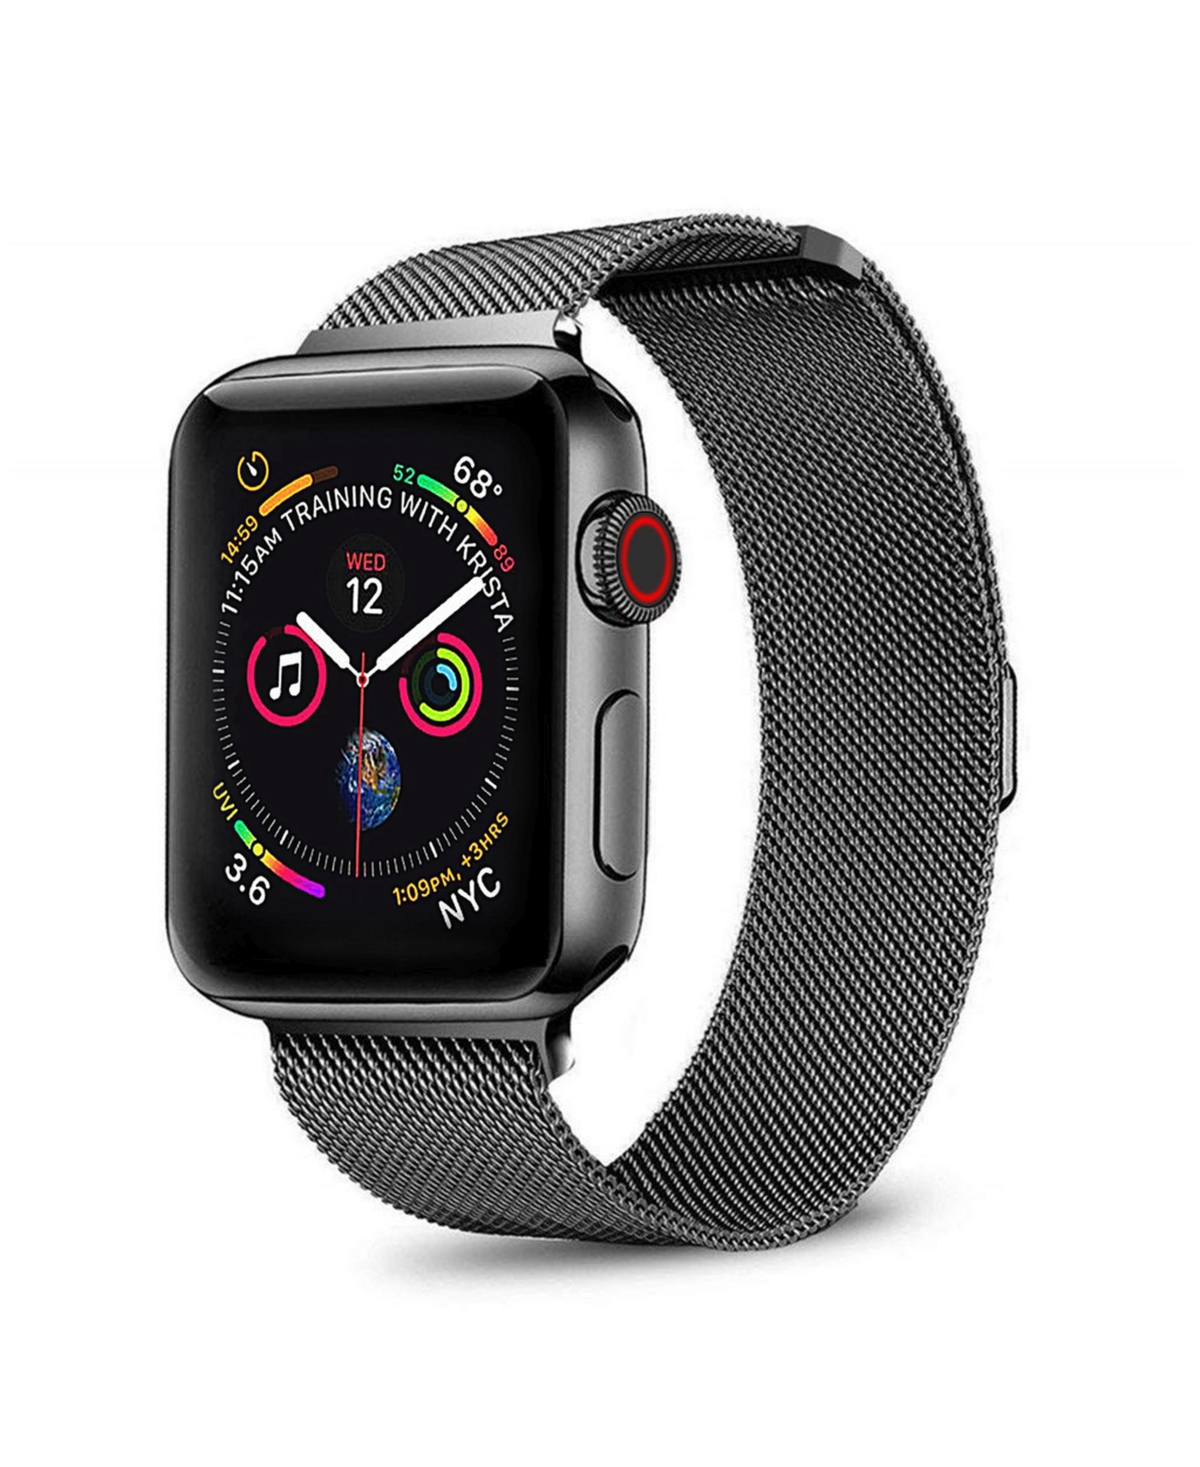 Men's and Women's Apple Black Stainless Steel Replacement Band 44mm - Black